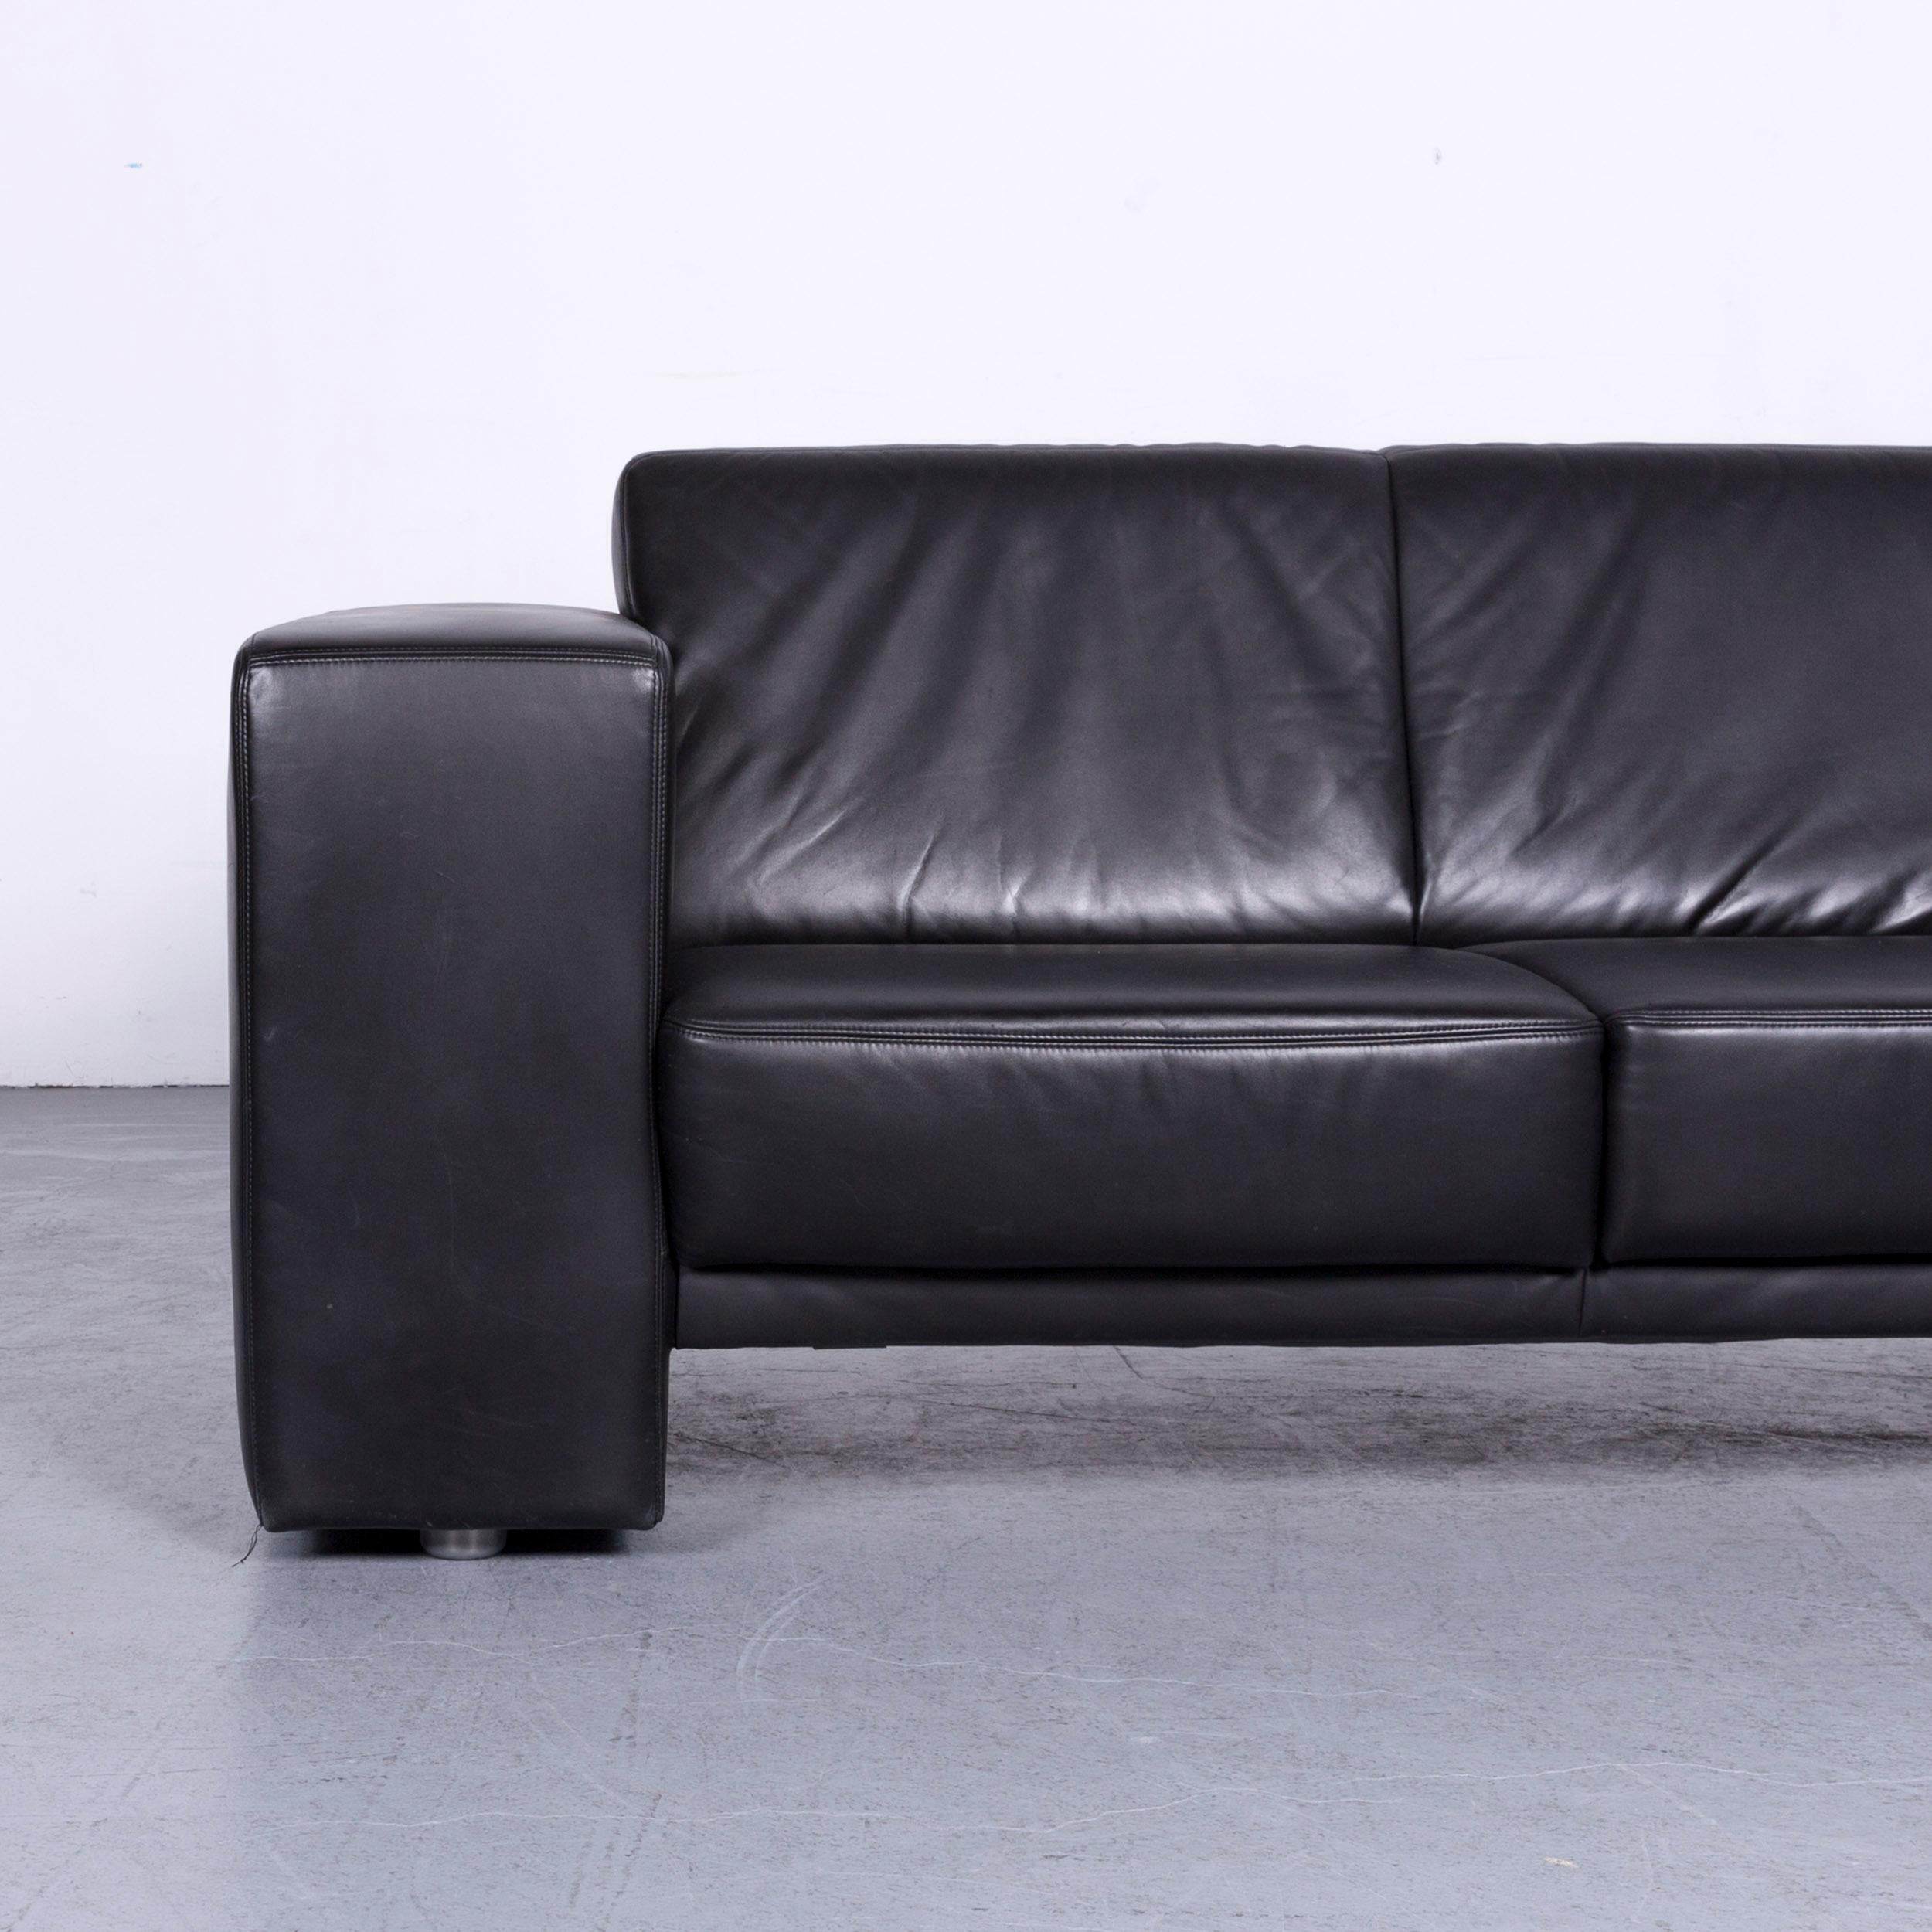 German Koinor Designer Leather Sofa Black Two-Seat Couch For Sale